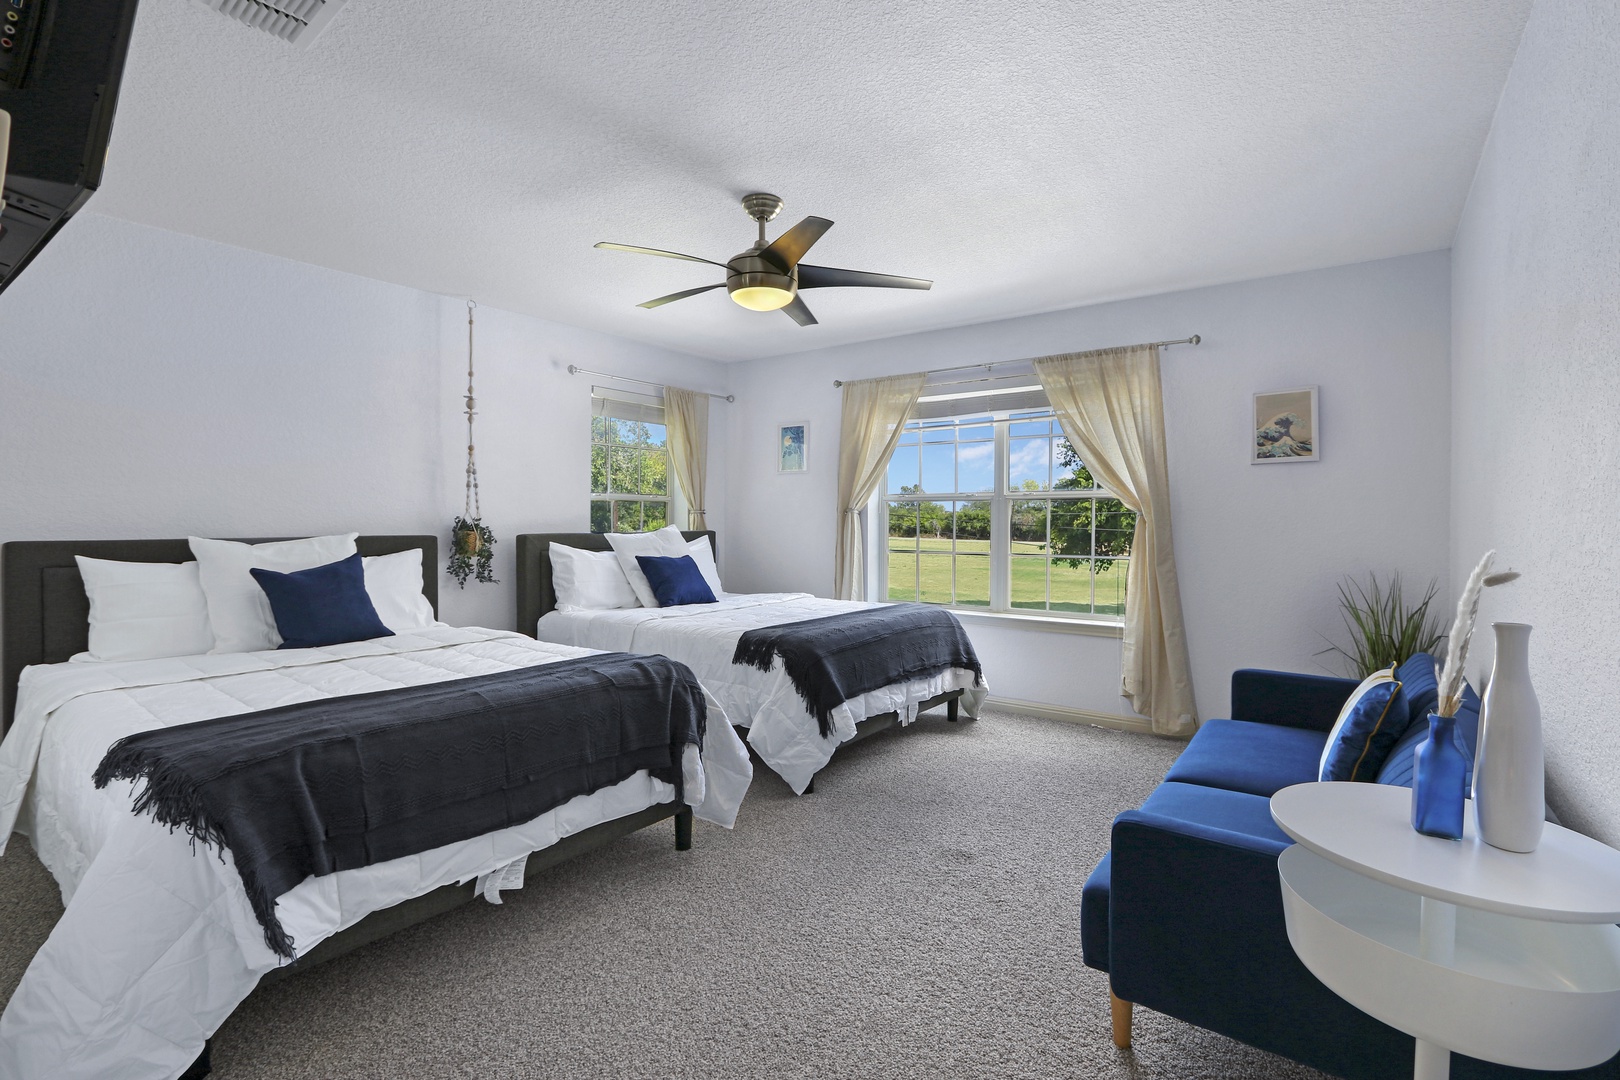 Bedroom 4 offers 2 chic queen beds, Smart TV, & a comfy lounge couch